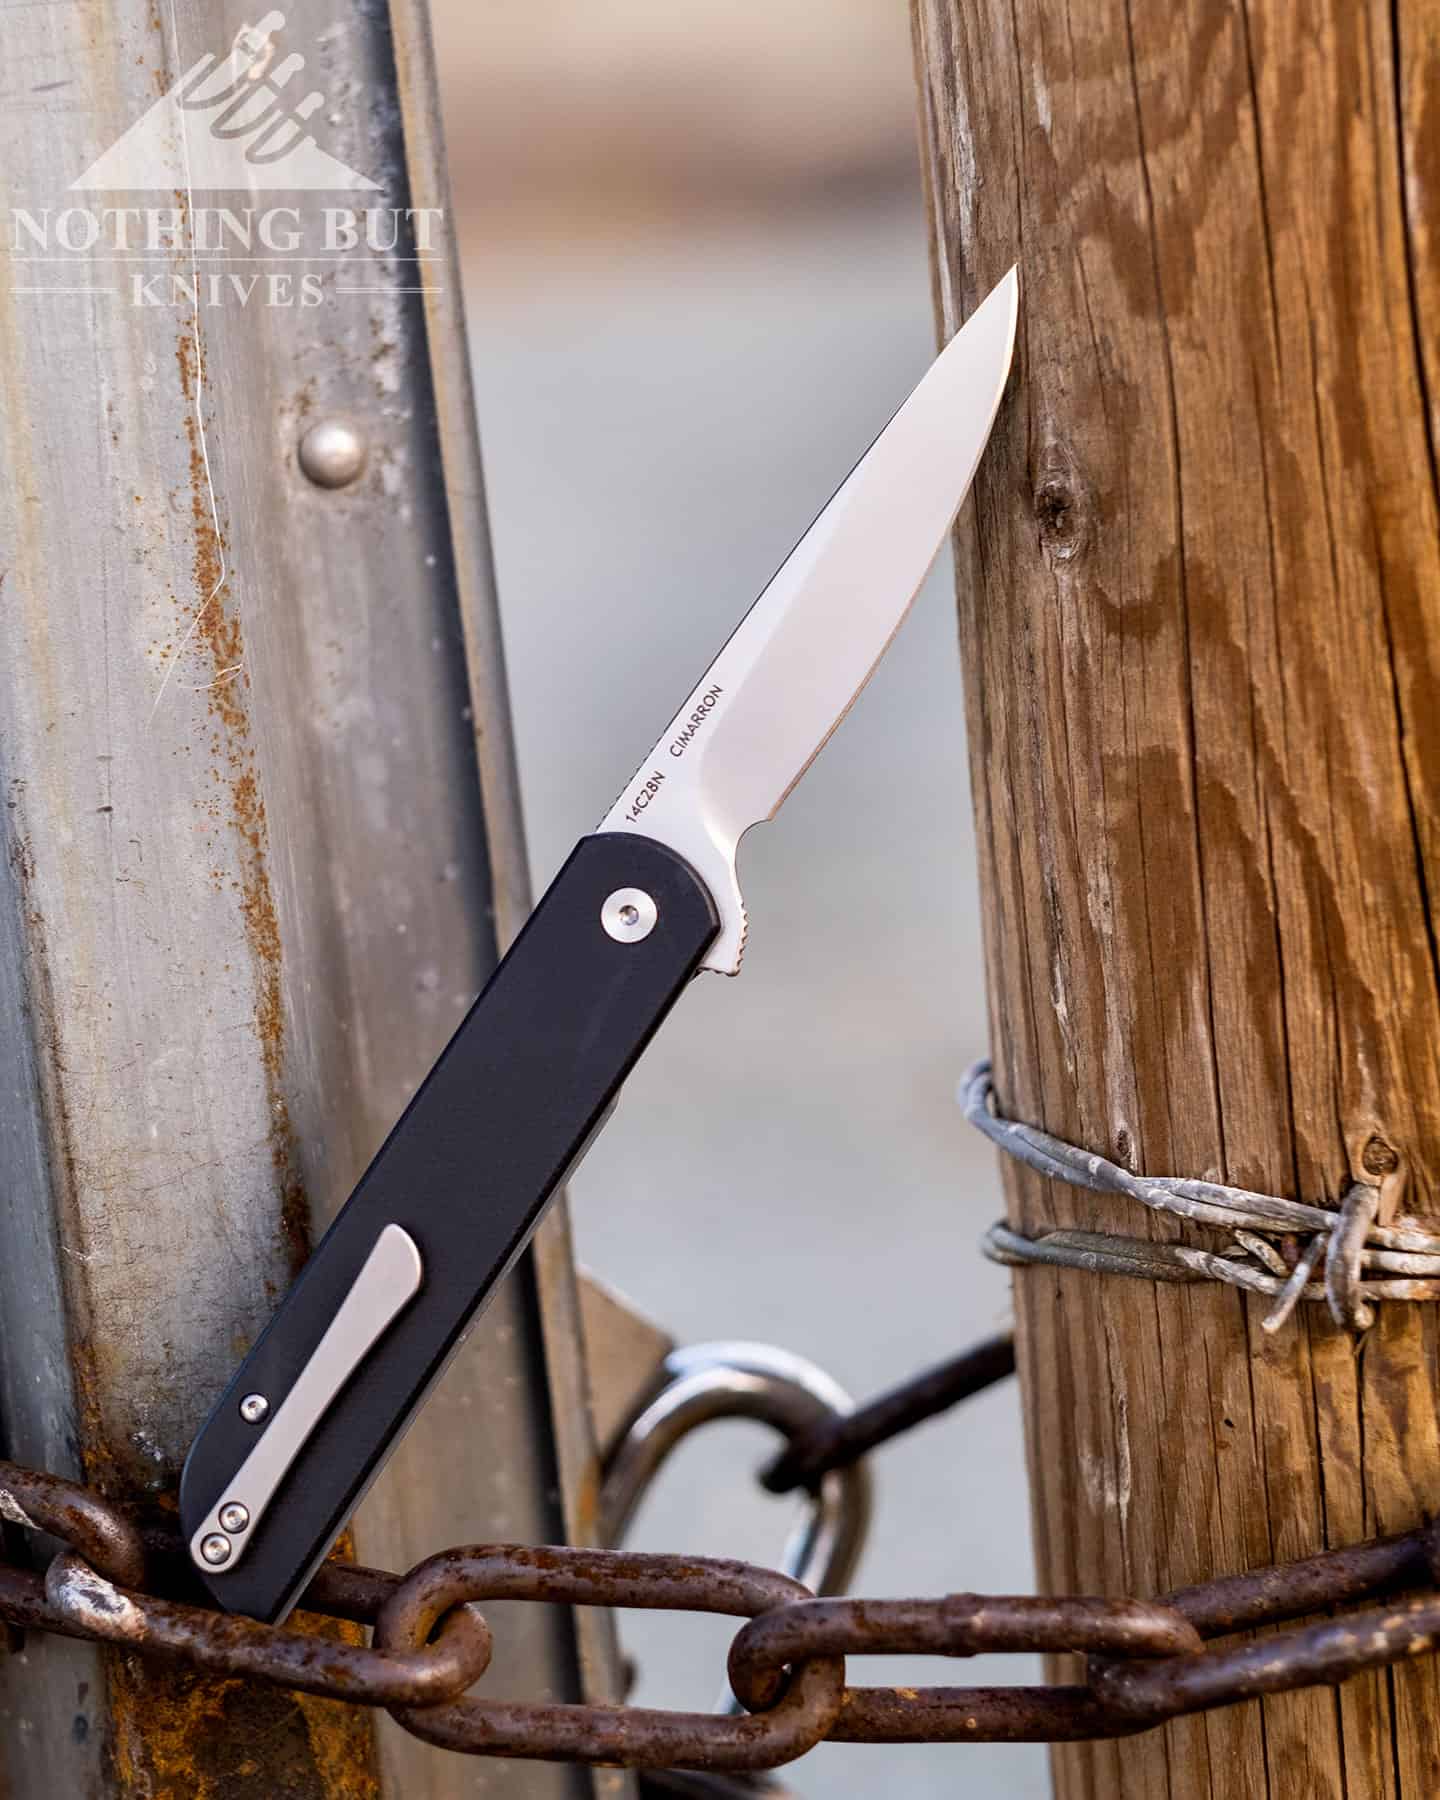 A profile image of the Finch Cimarron to show the scales and blade in the open position.